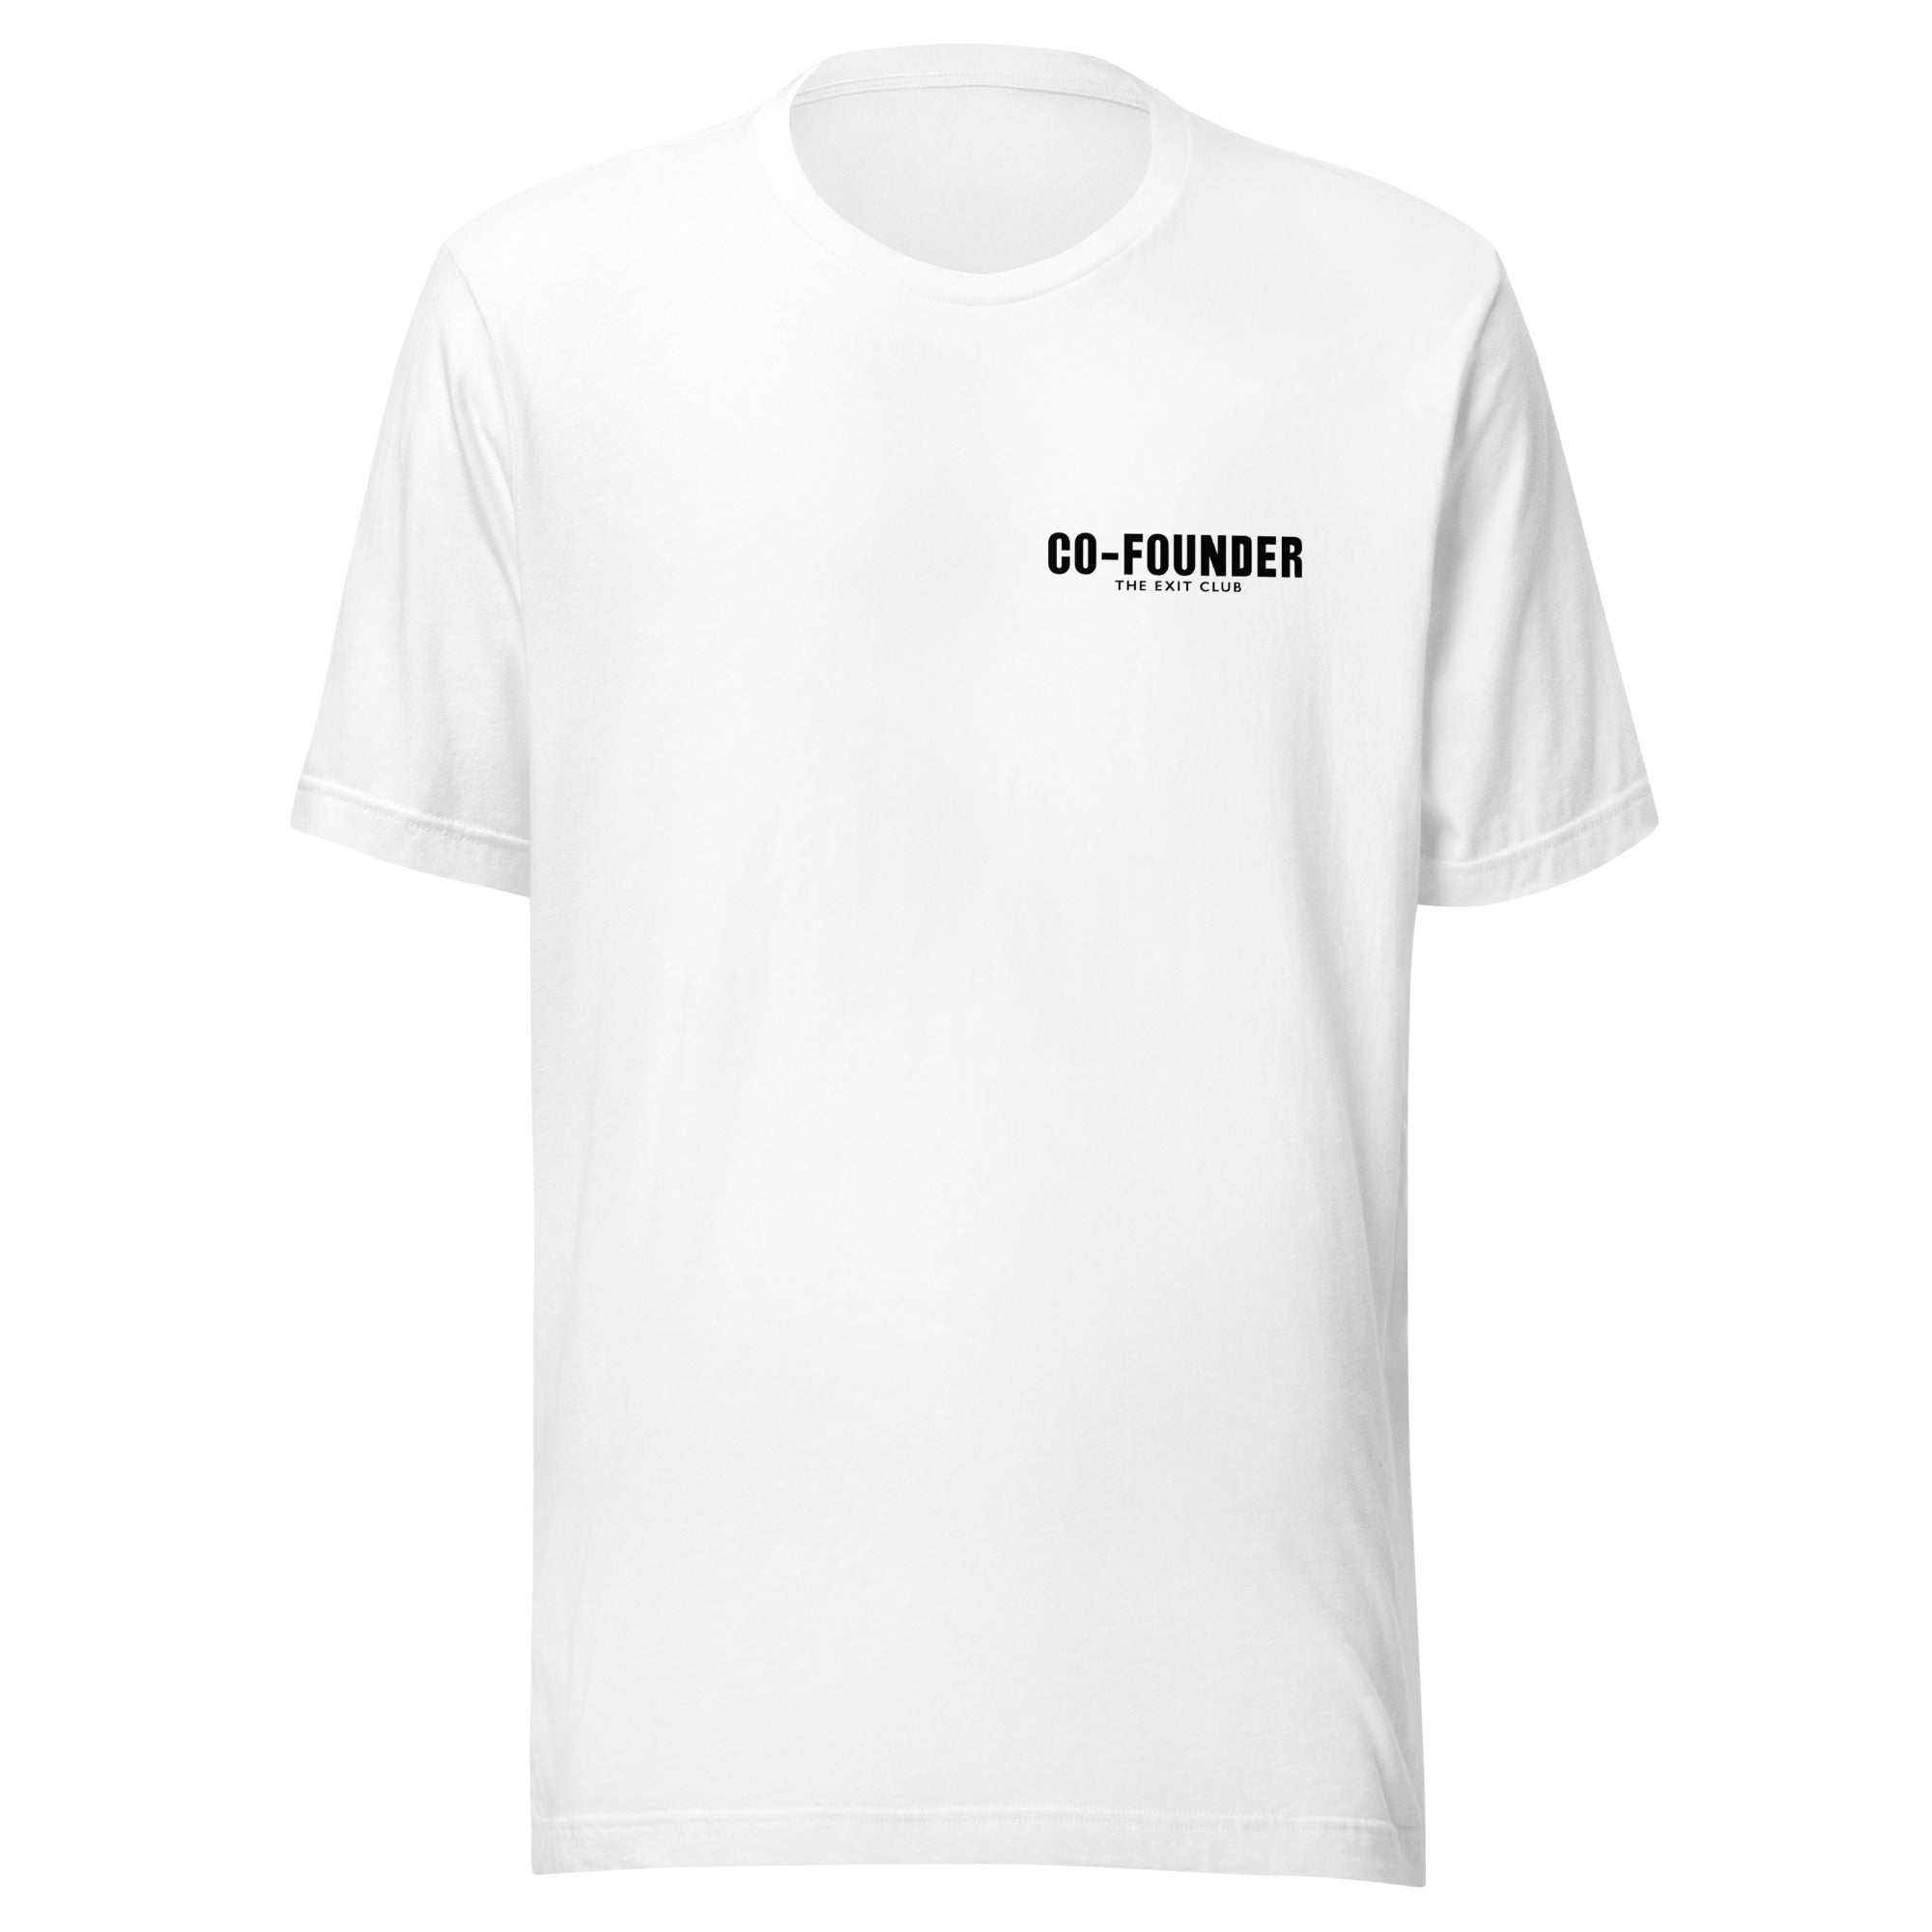 CO-FOUNDER T-SHIRT